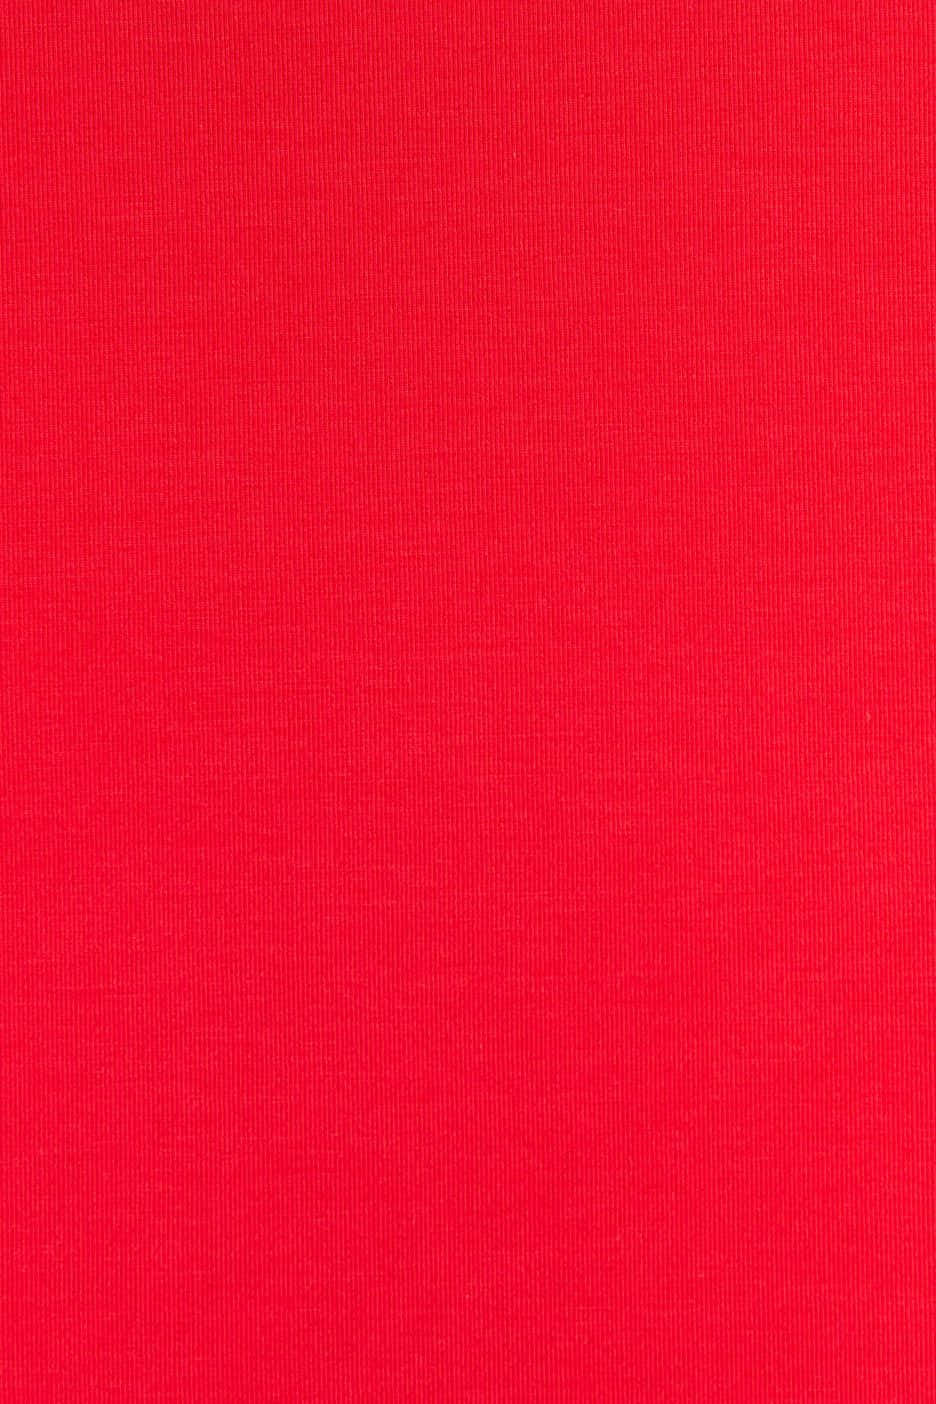 Solid Red Background Image